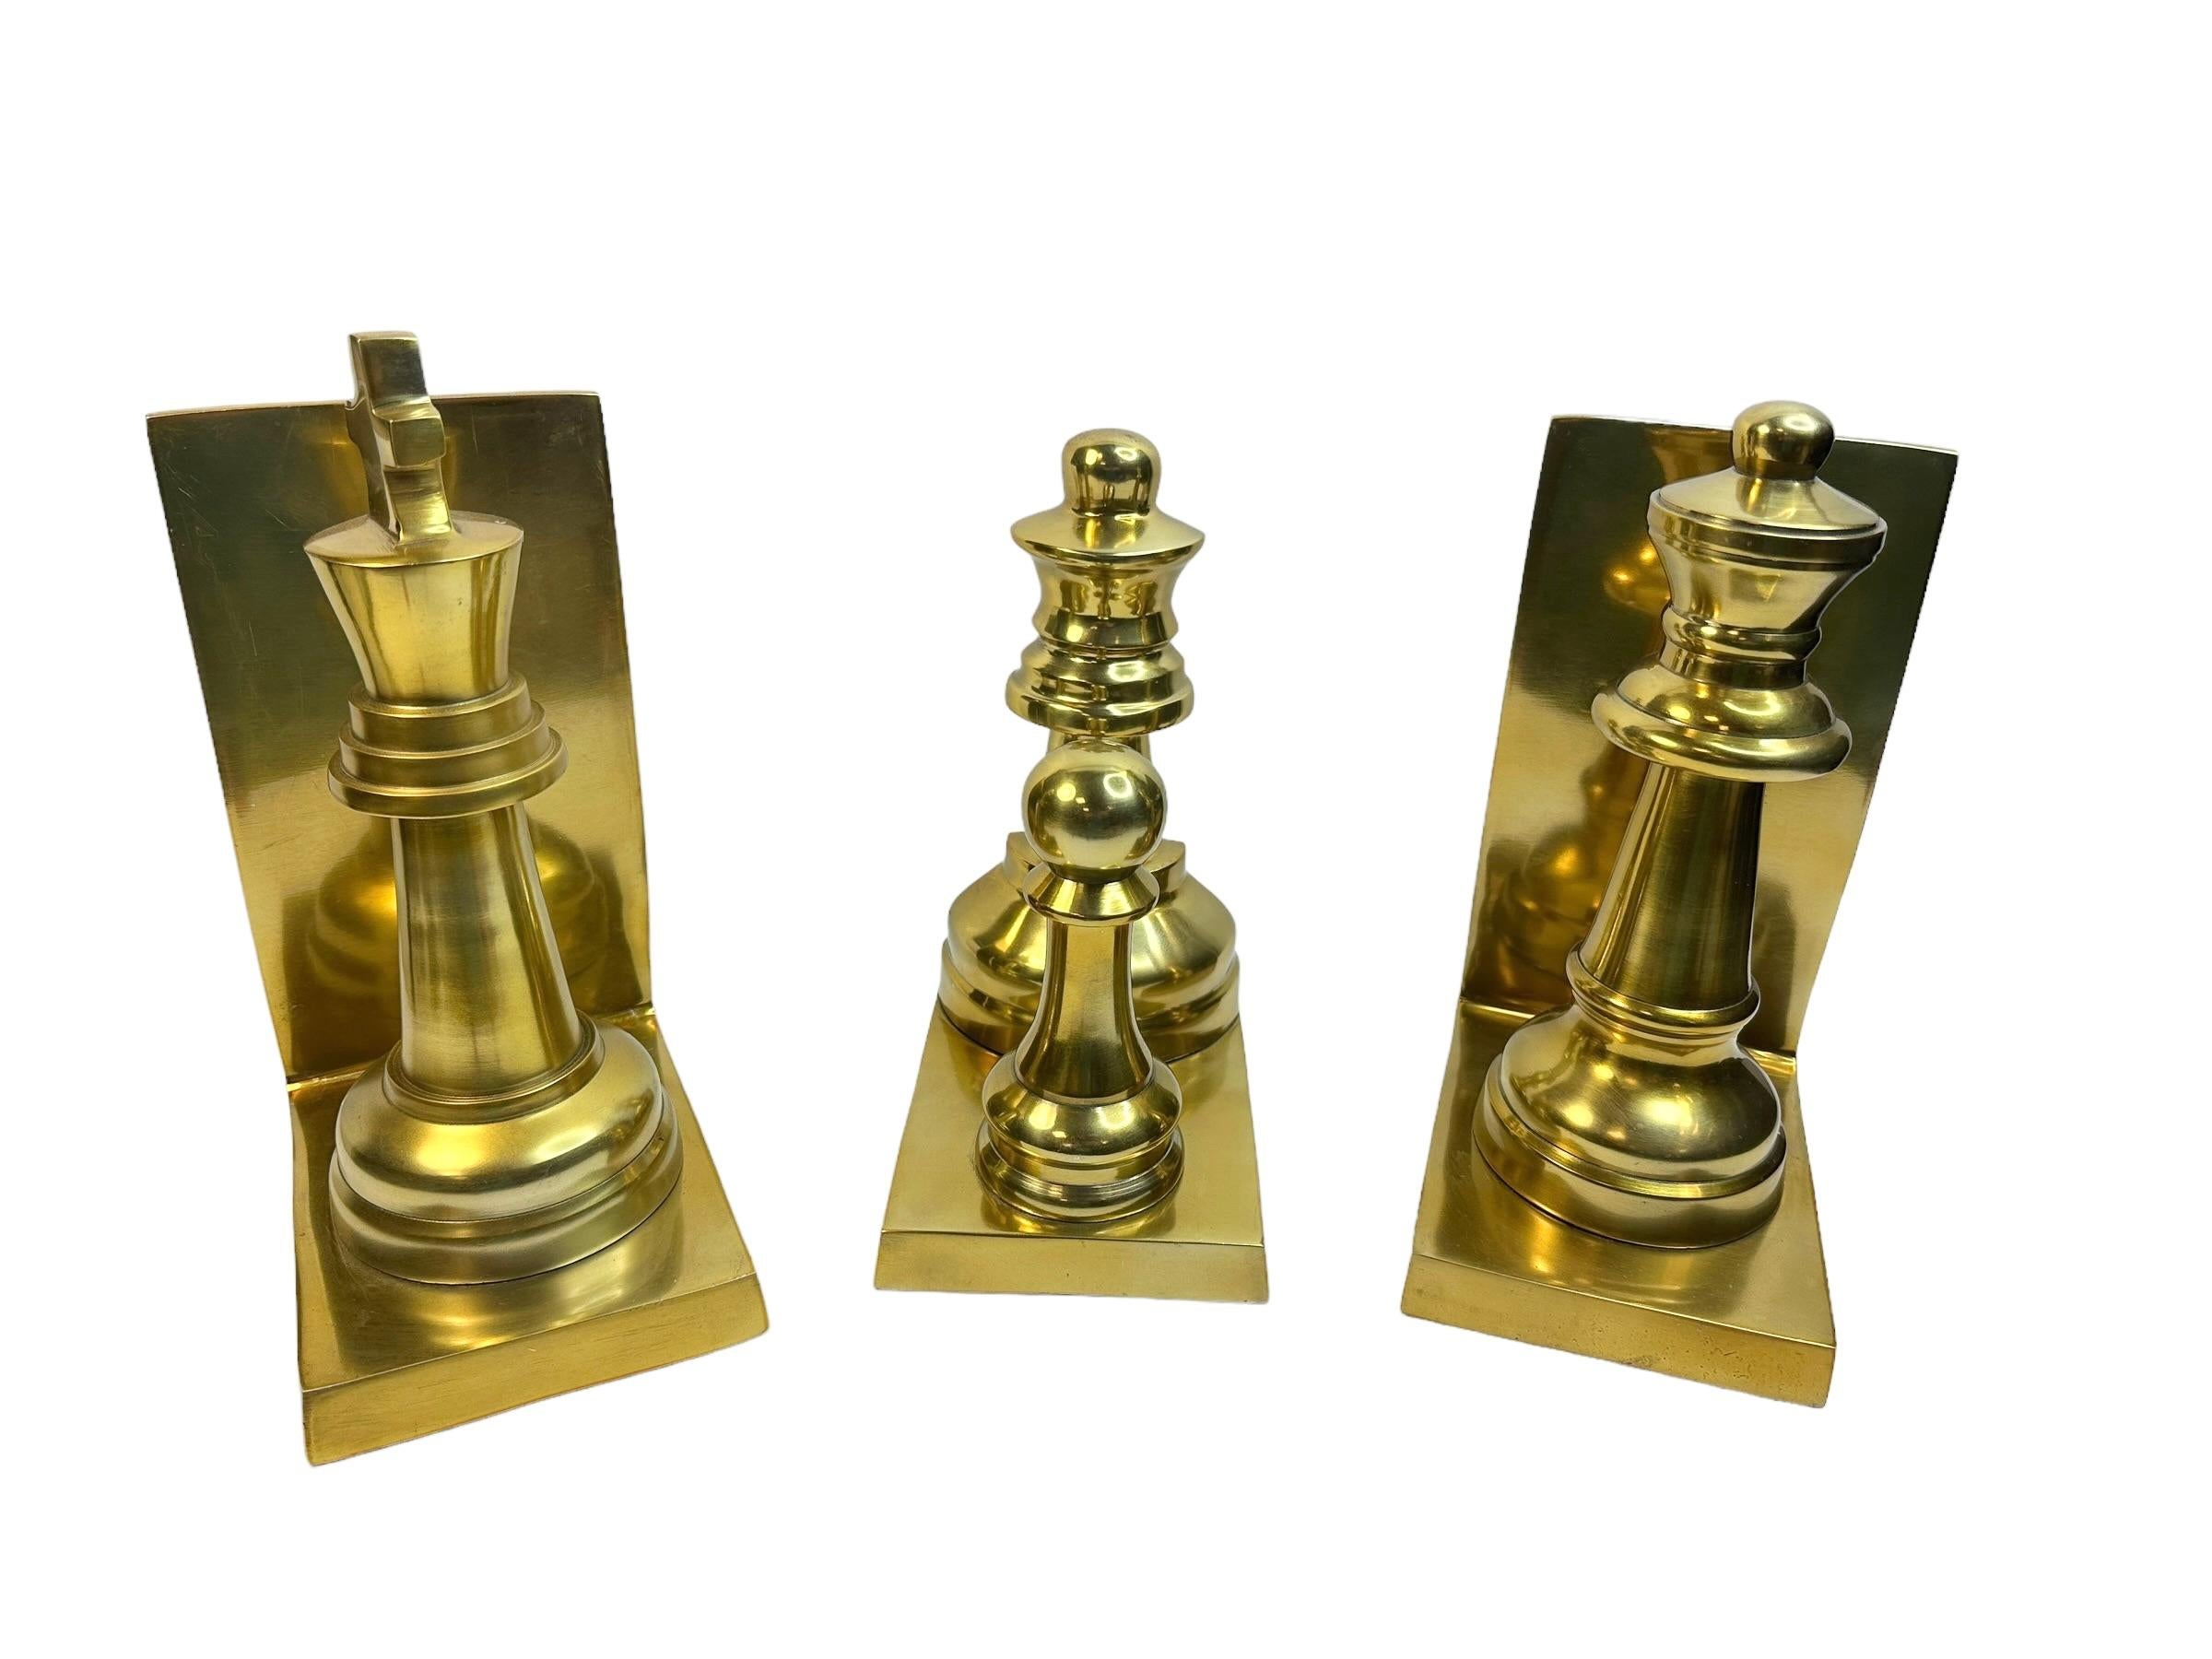 Channeling old world glamor into your home decor, this set of three brass finish bookends is both a useful and decorative addition to your home office, library, study or lounge. Found at an estate sale in Bologna Italy. 
The King bookend is approx.